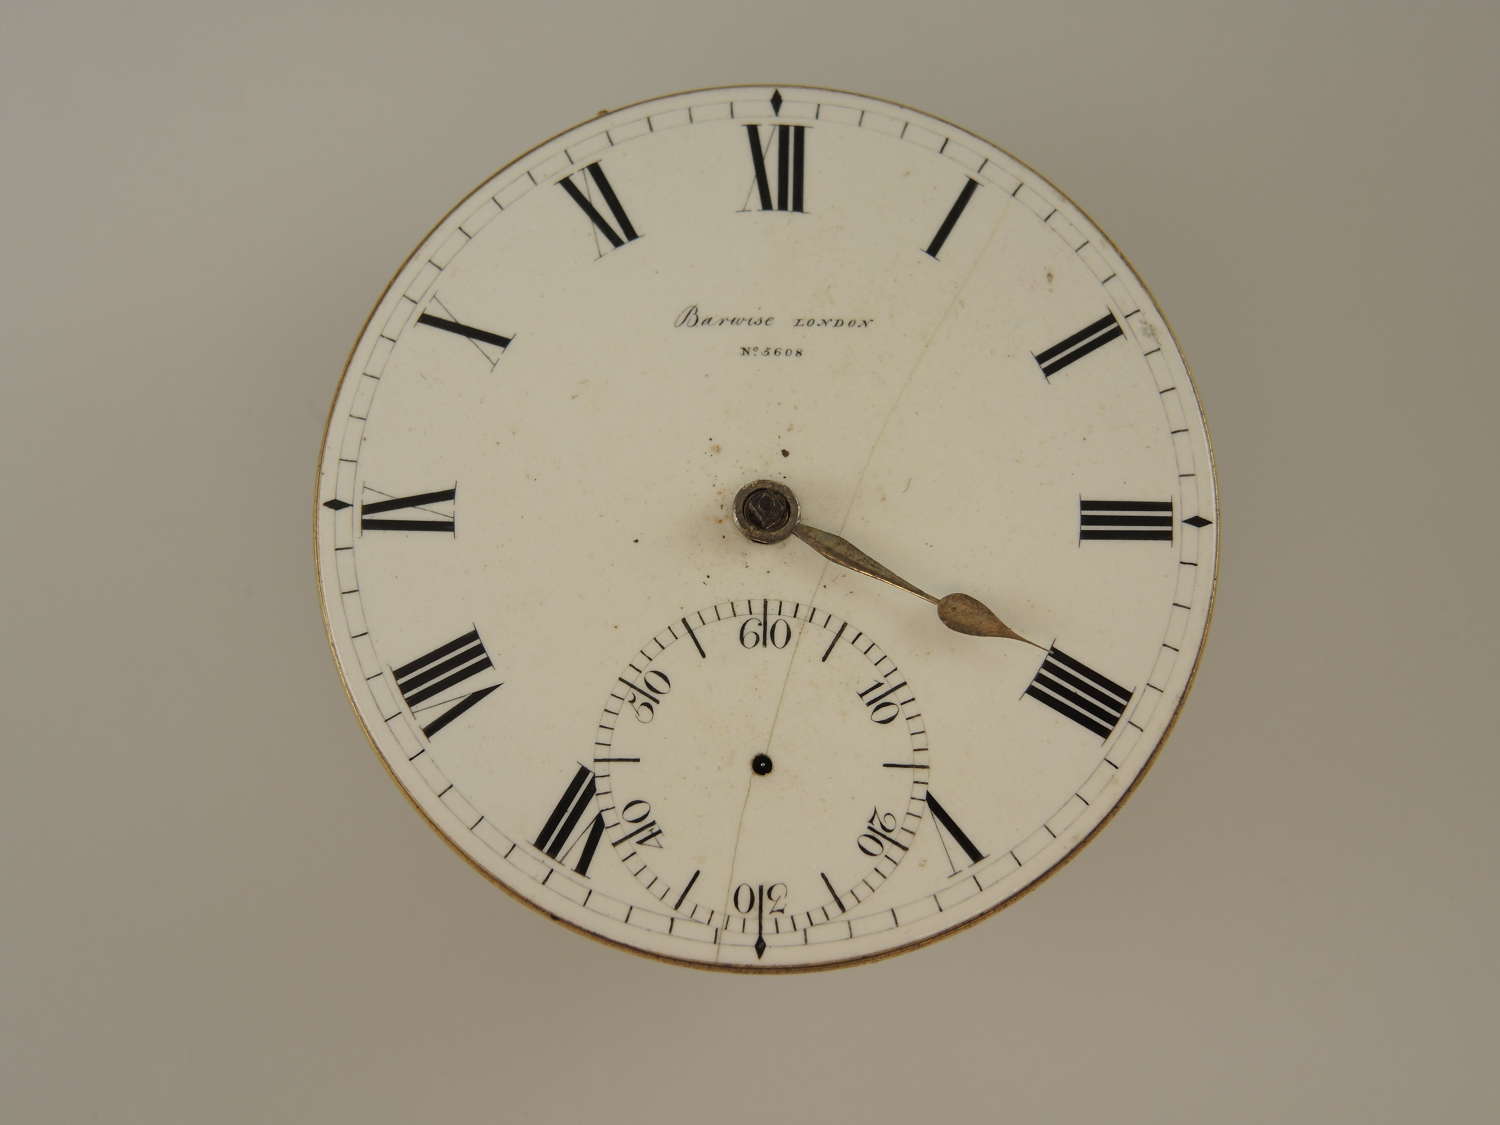 Rare Repeater CHRONOMETER by Barwise c1830